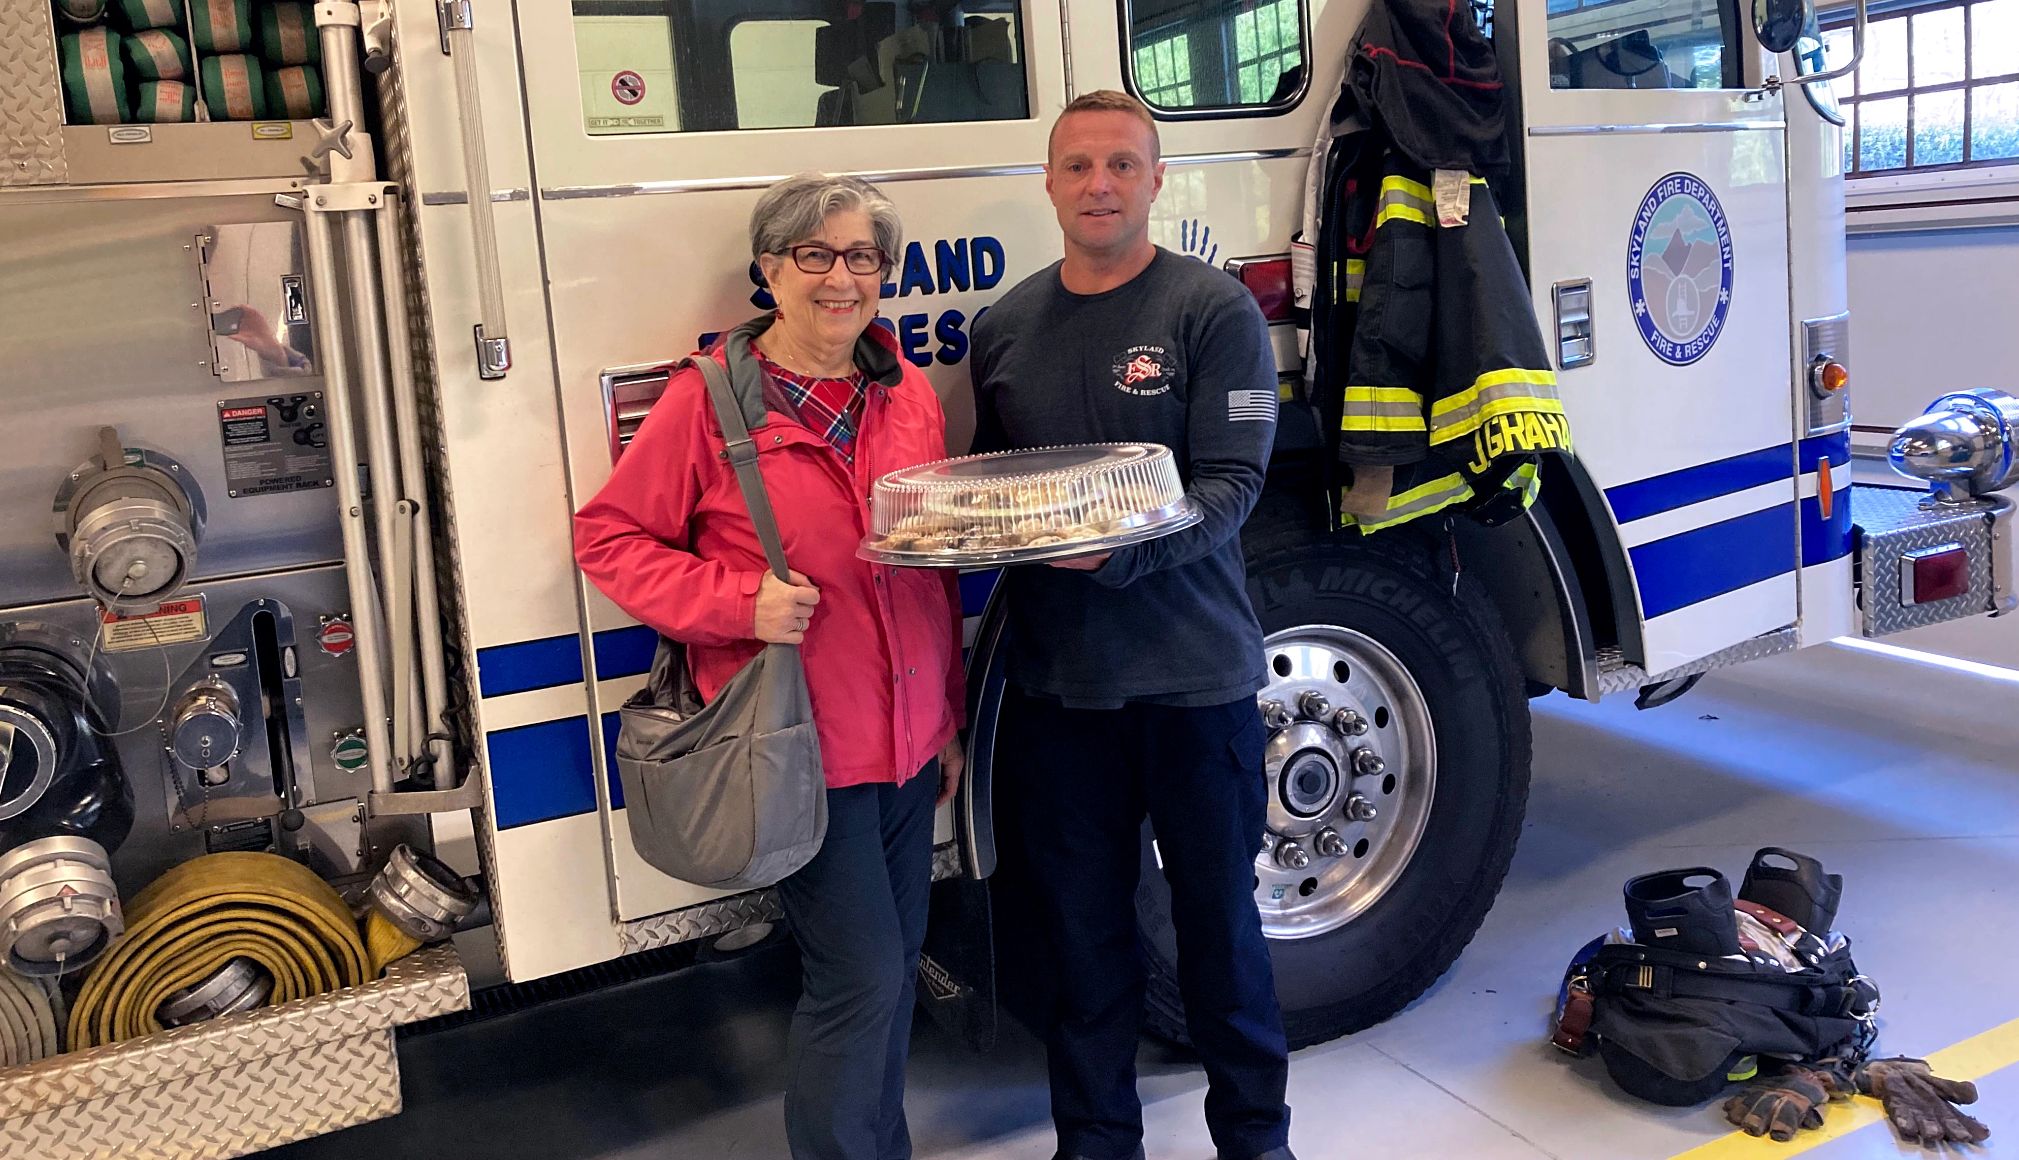 Barbara Beckerman gives extra baked goods to a firefighter